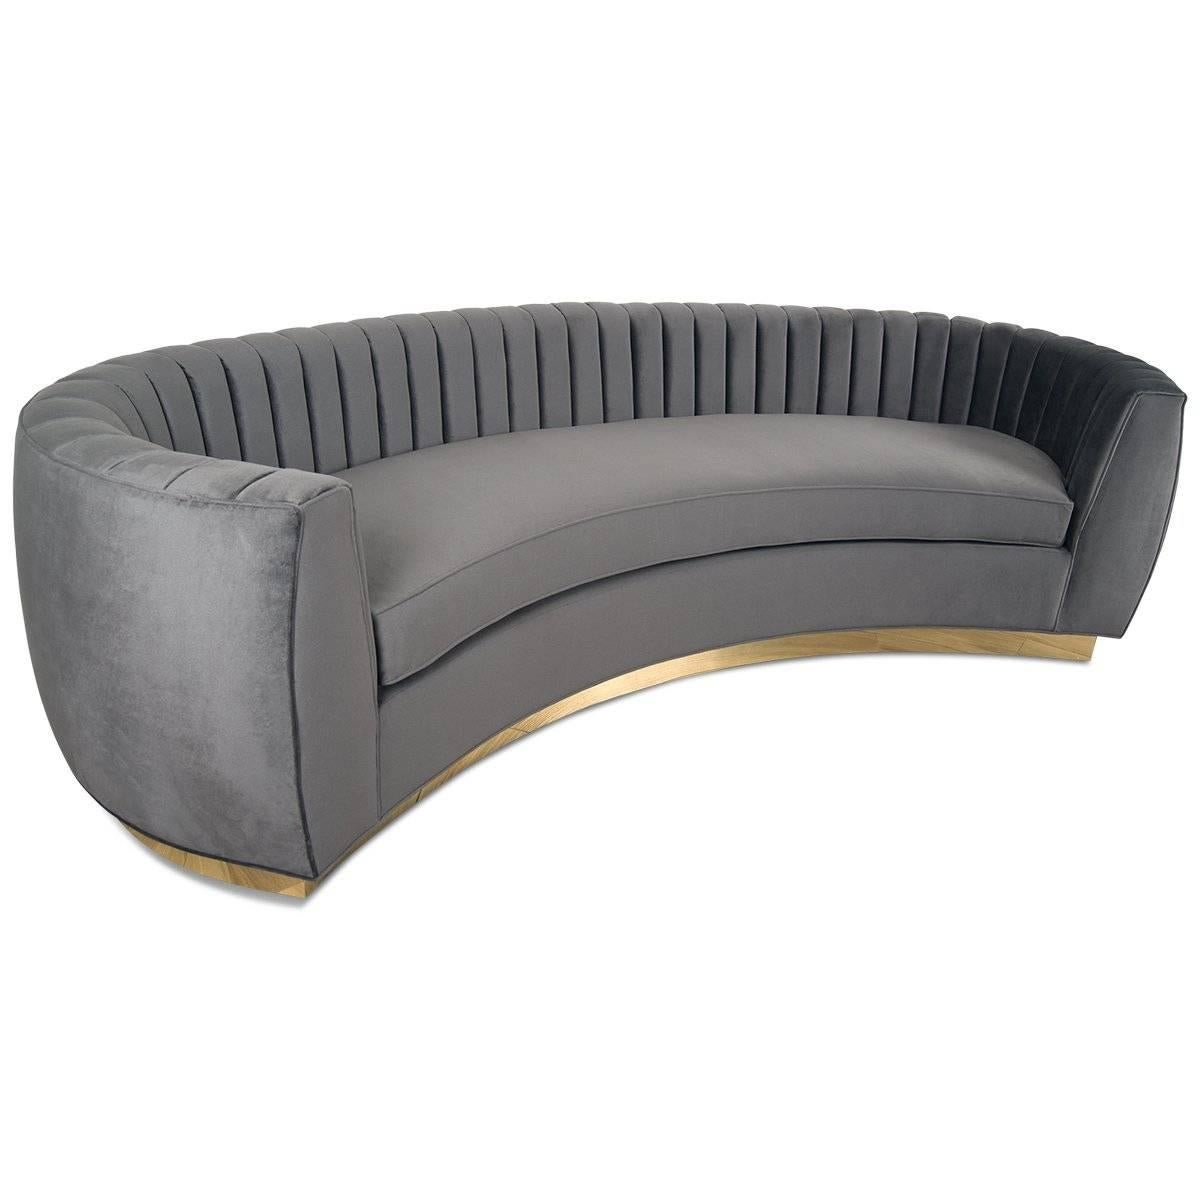 Our all-new St. Germain 10 foot sofa is similar in style to our Art Deco sofa featuring classic clean lines, sharp curves, crescent-like shape, curved in arms, and all-around Gold colored toe kick. With the long arm tufting on the backrest, this is